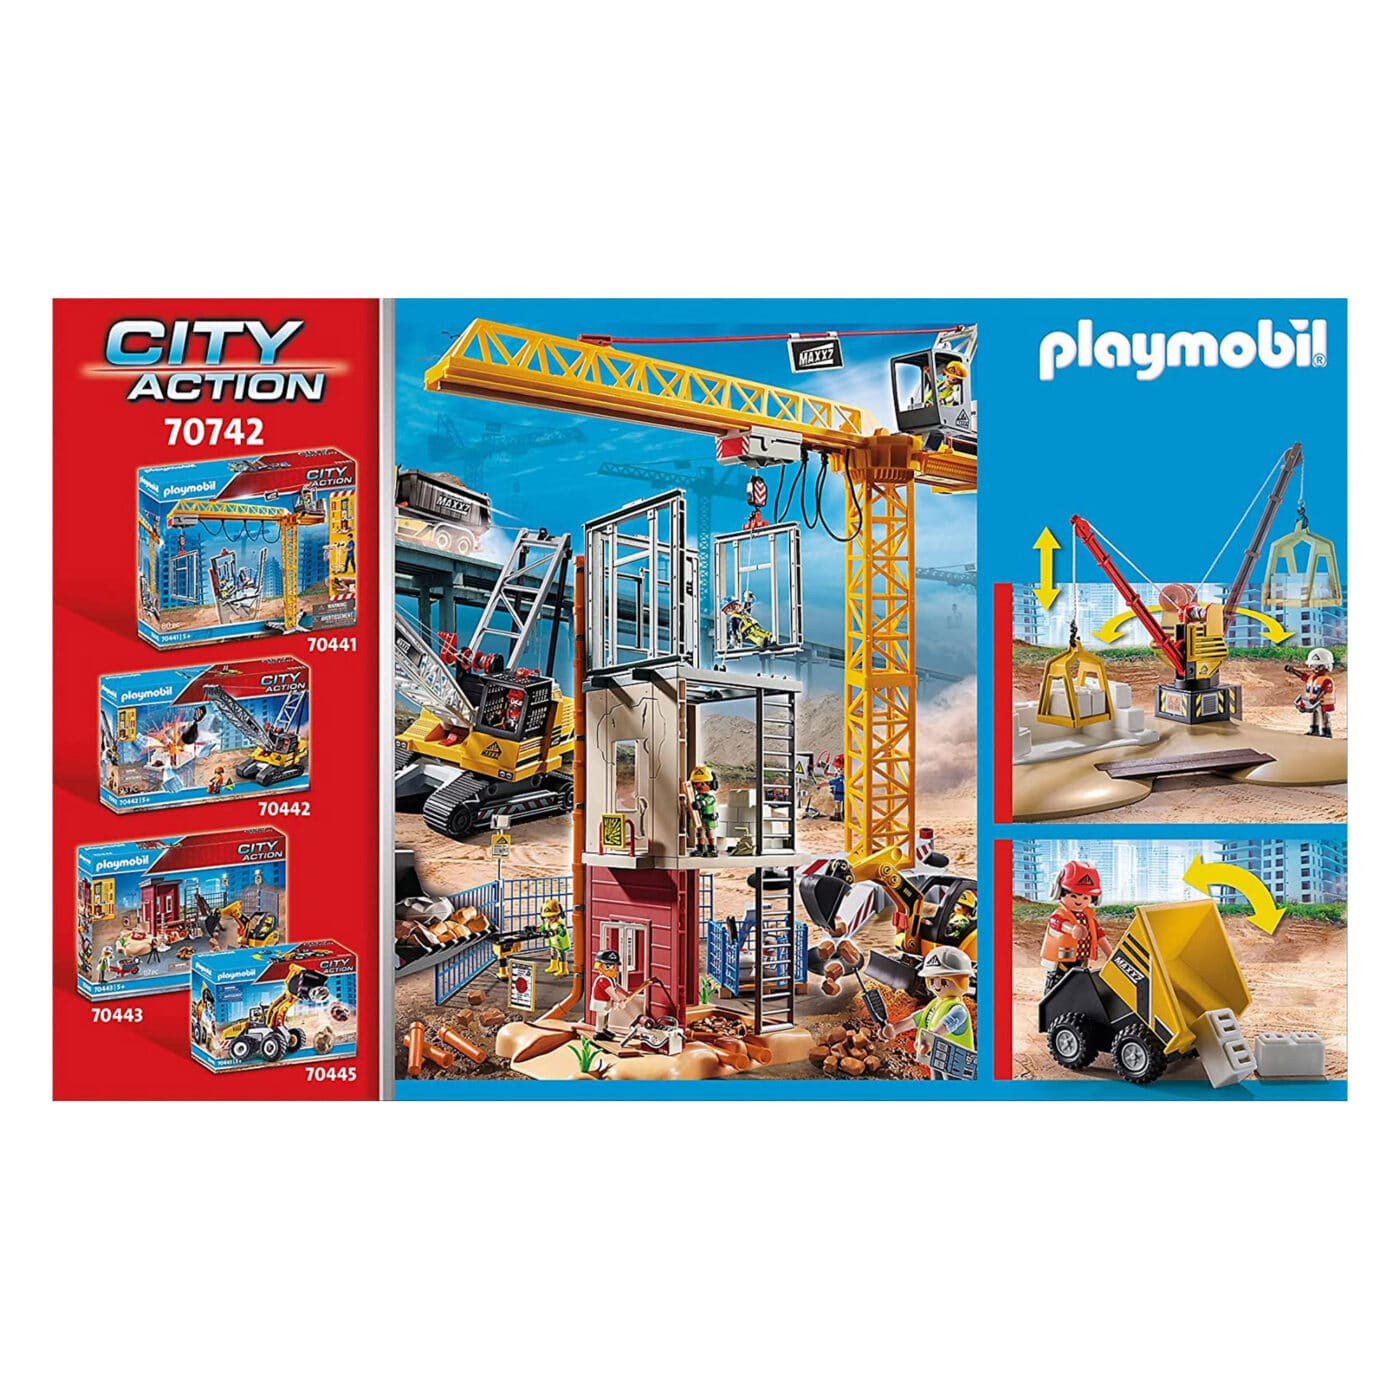 Playmobil - City Action Construction Site with Flatbed 70742